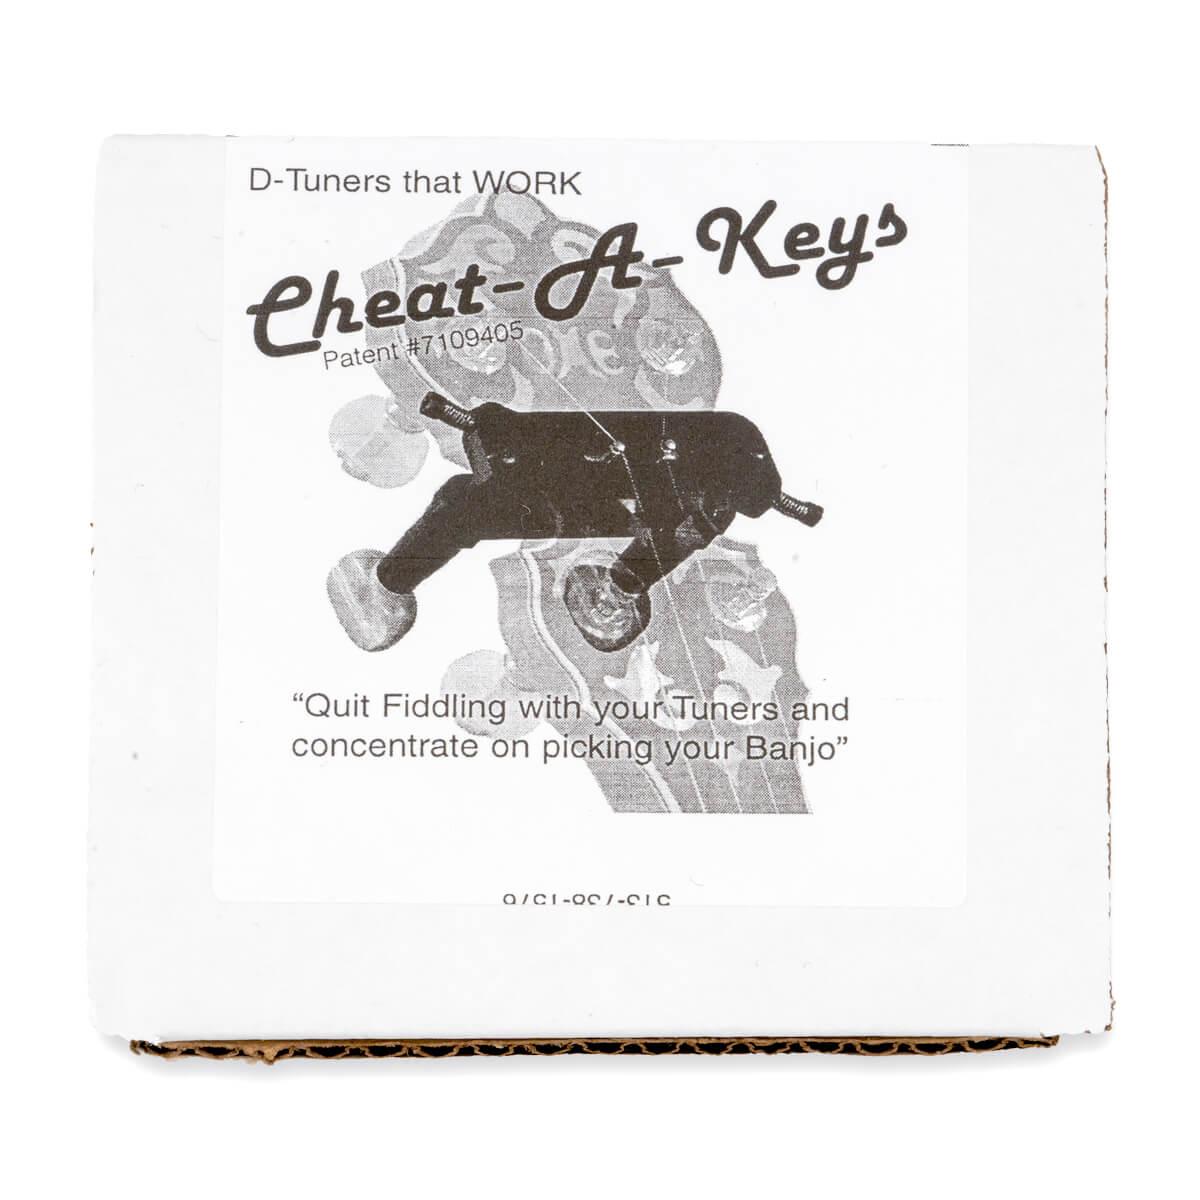 Packaging for Cheat-A-Keys Banjo D-Tuners